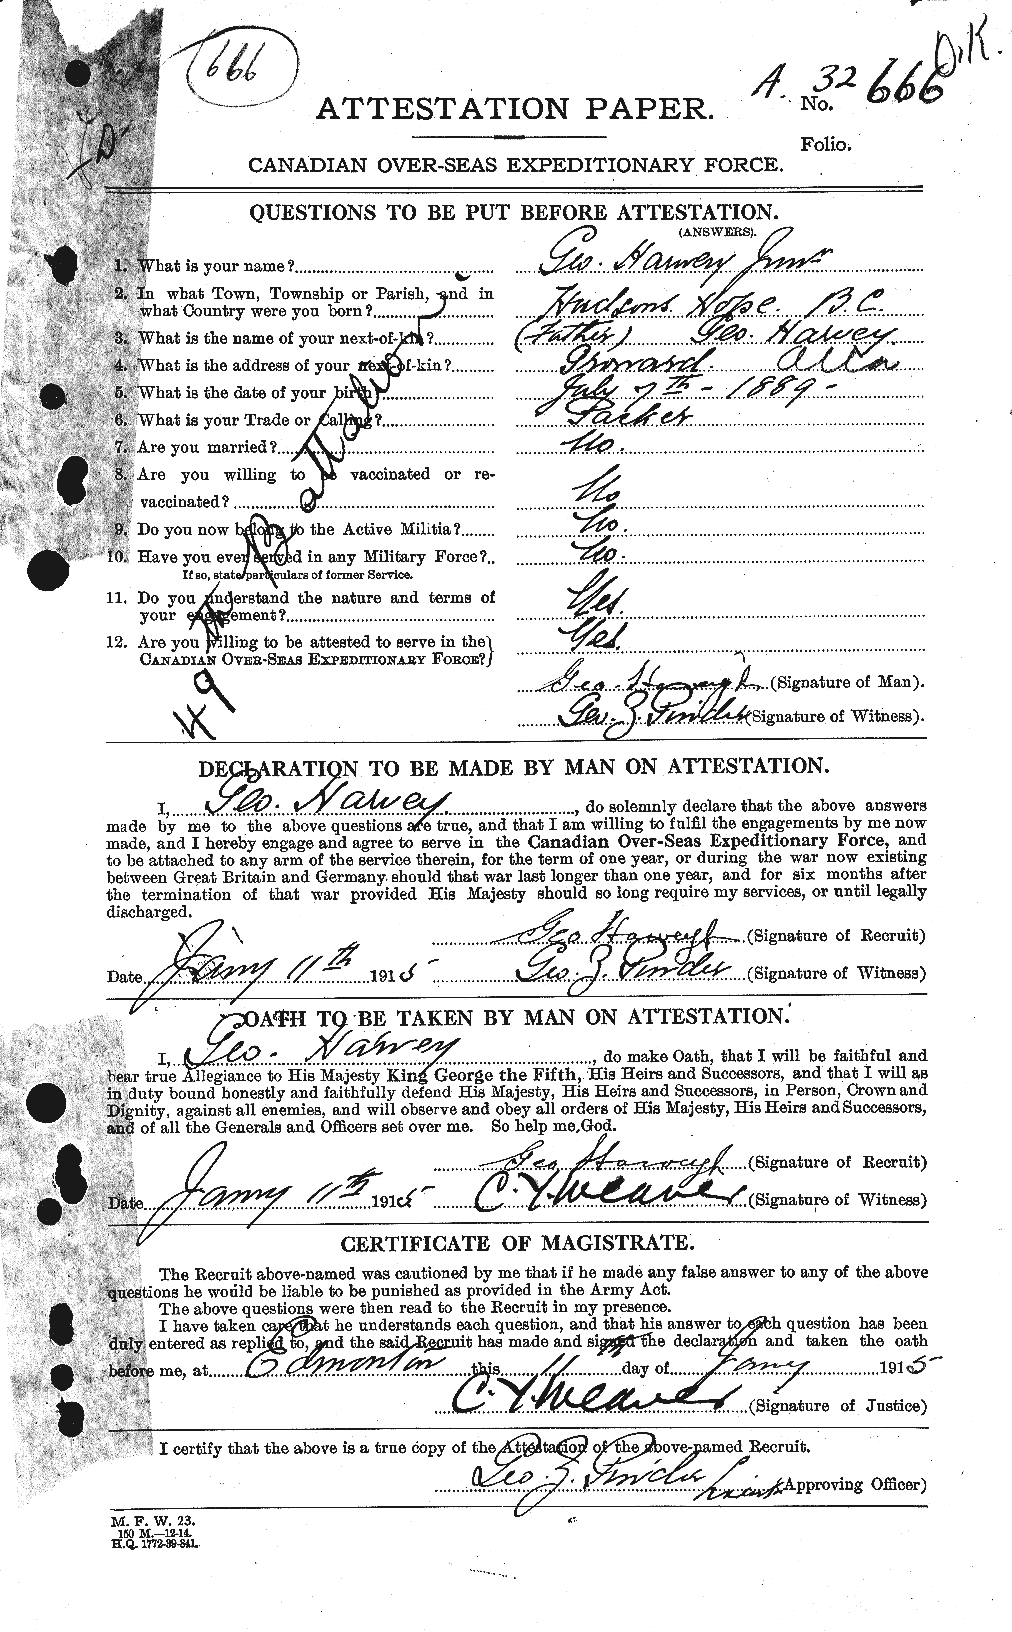 Personnel Records of the First World War - CEF 383030a